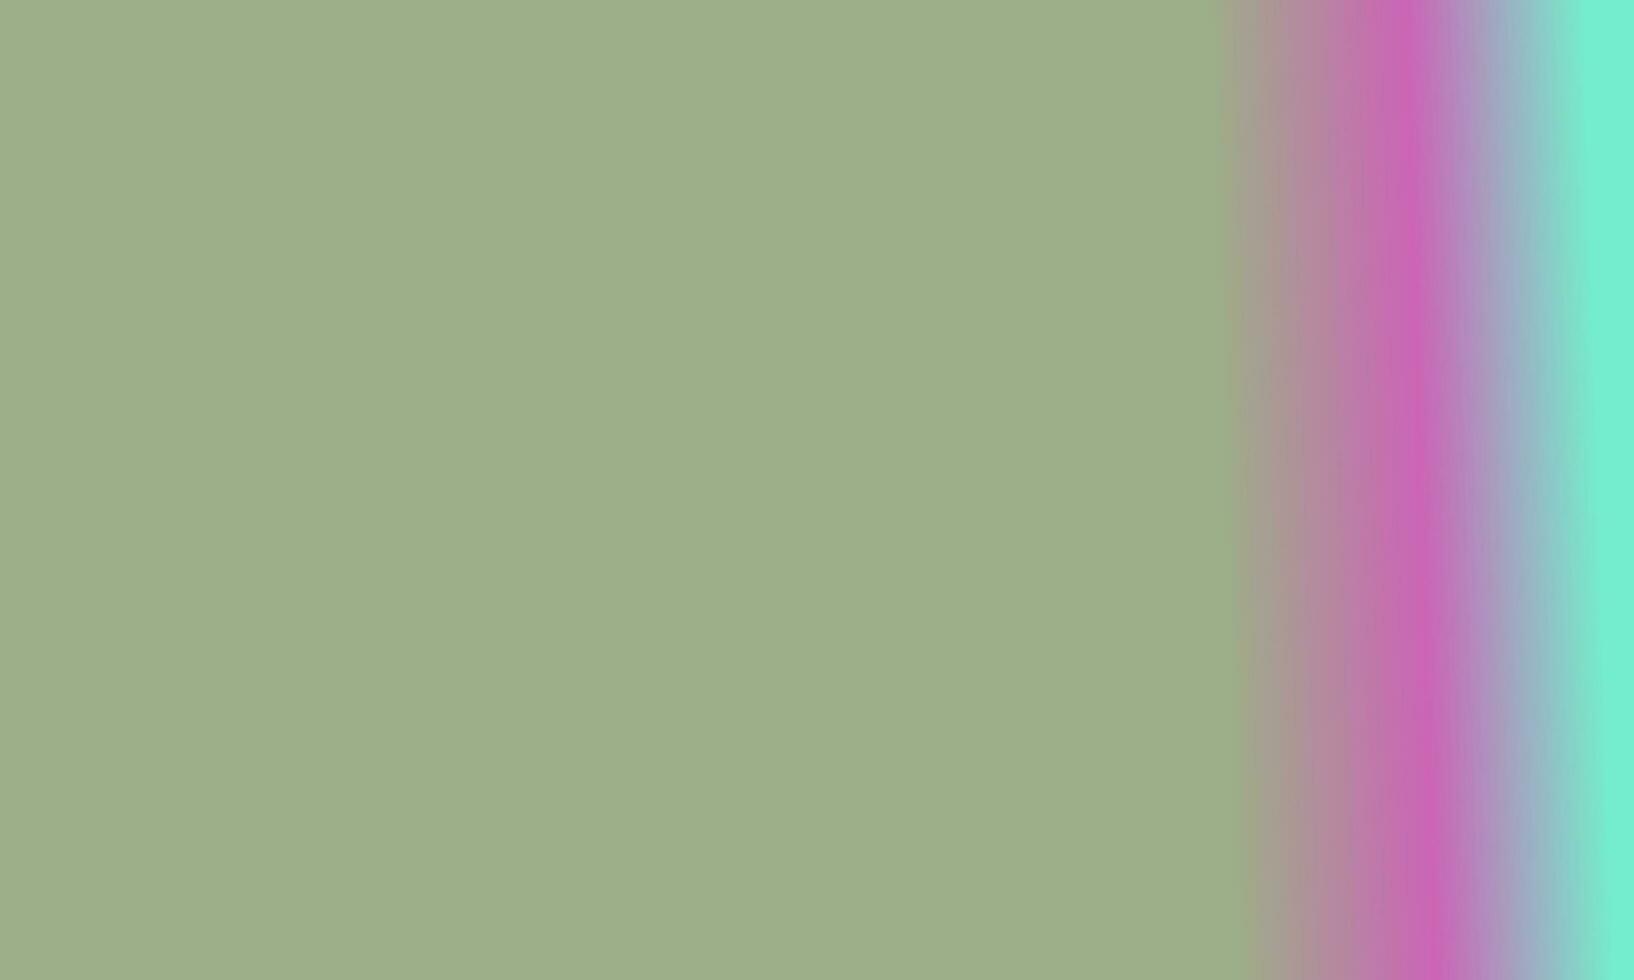 Design simple sage green,cyan and pink gradient color illustration background photo